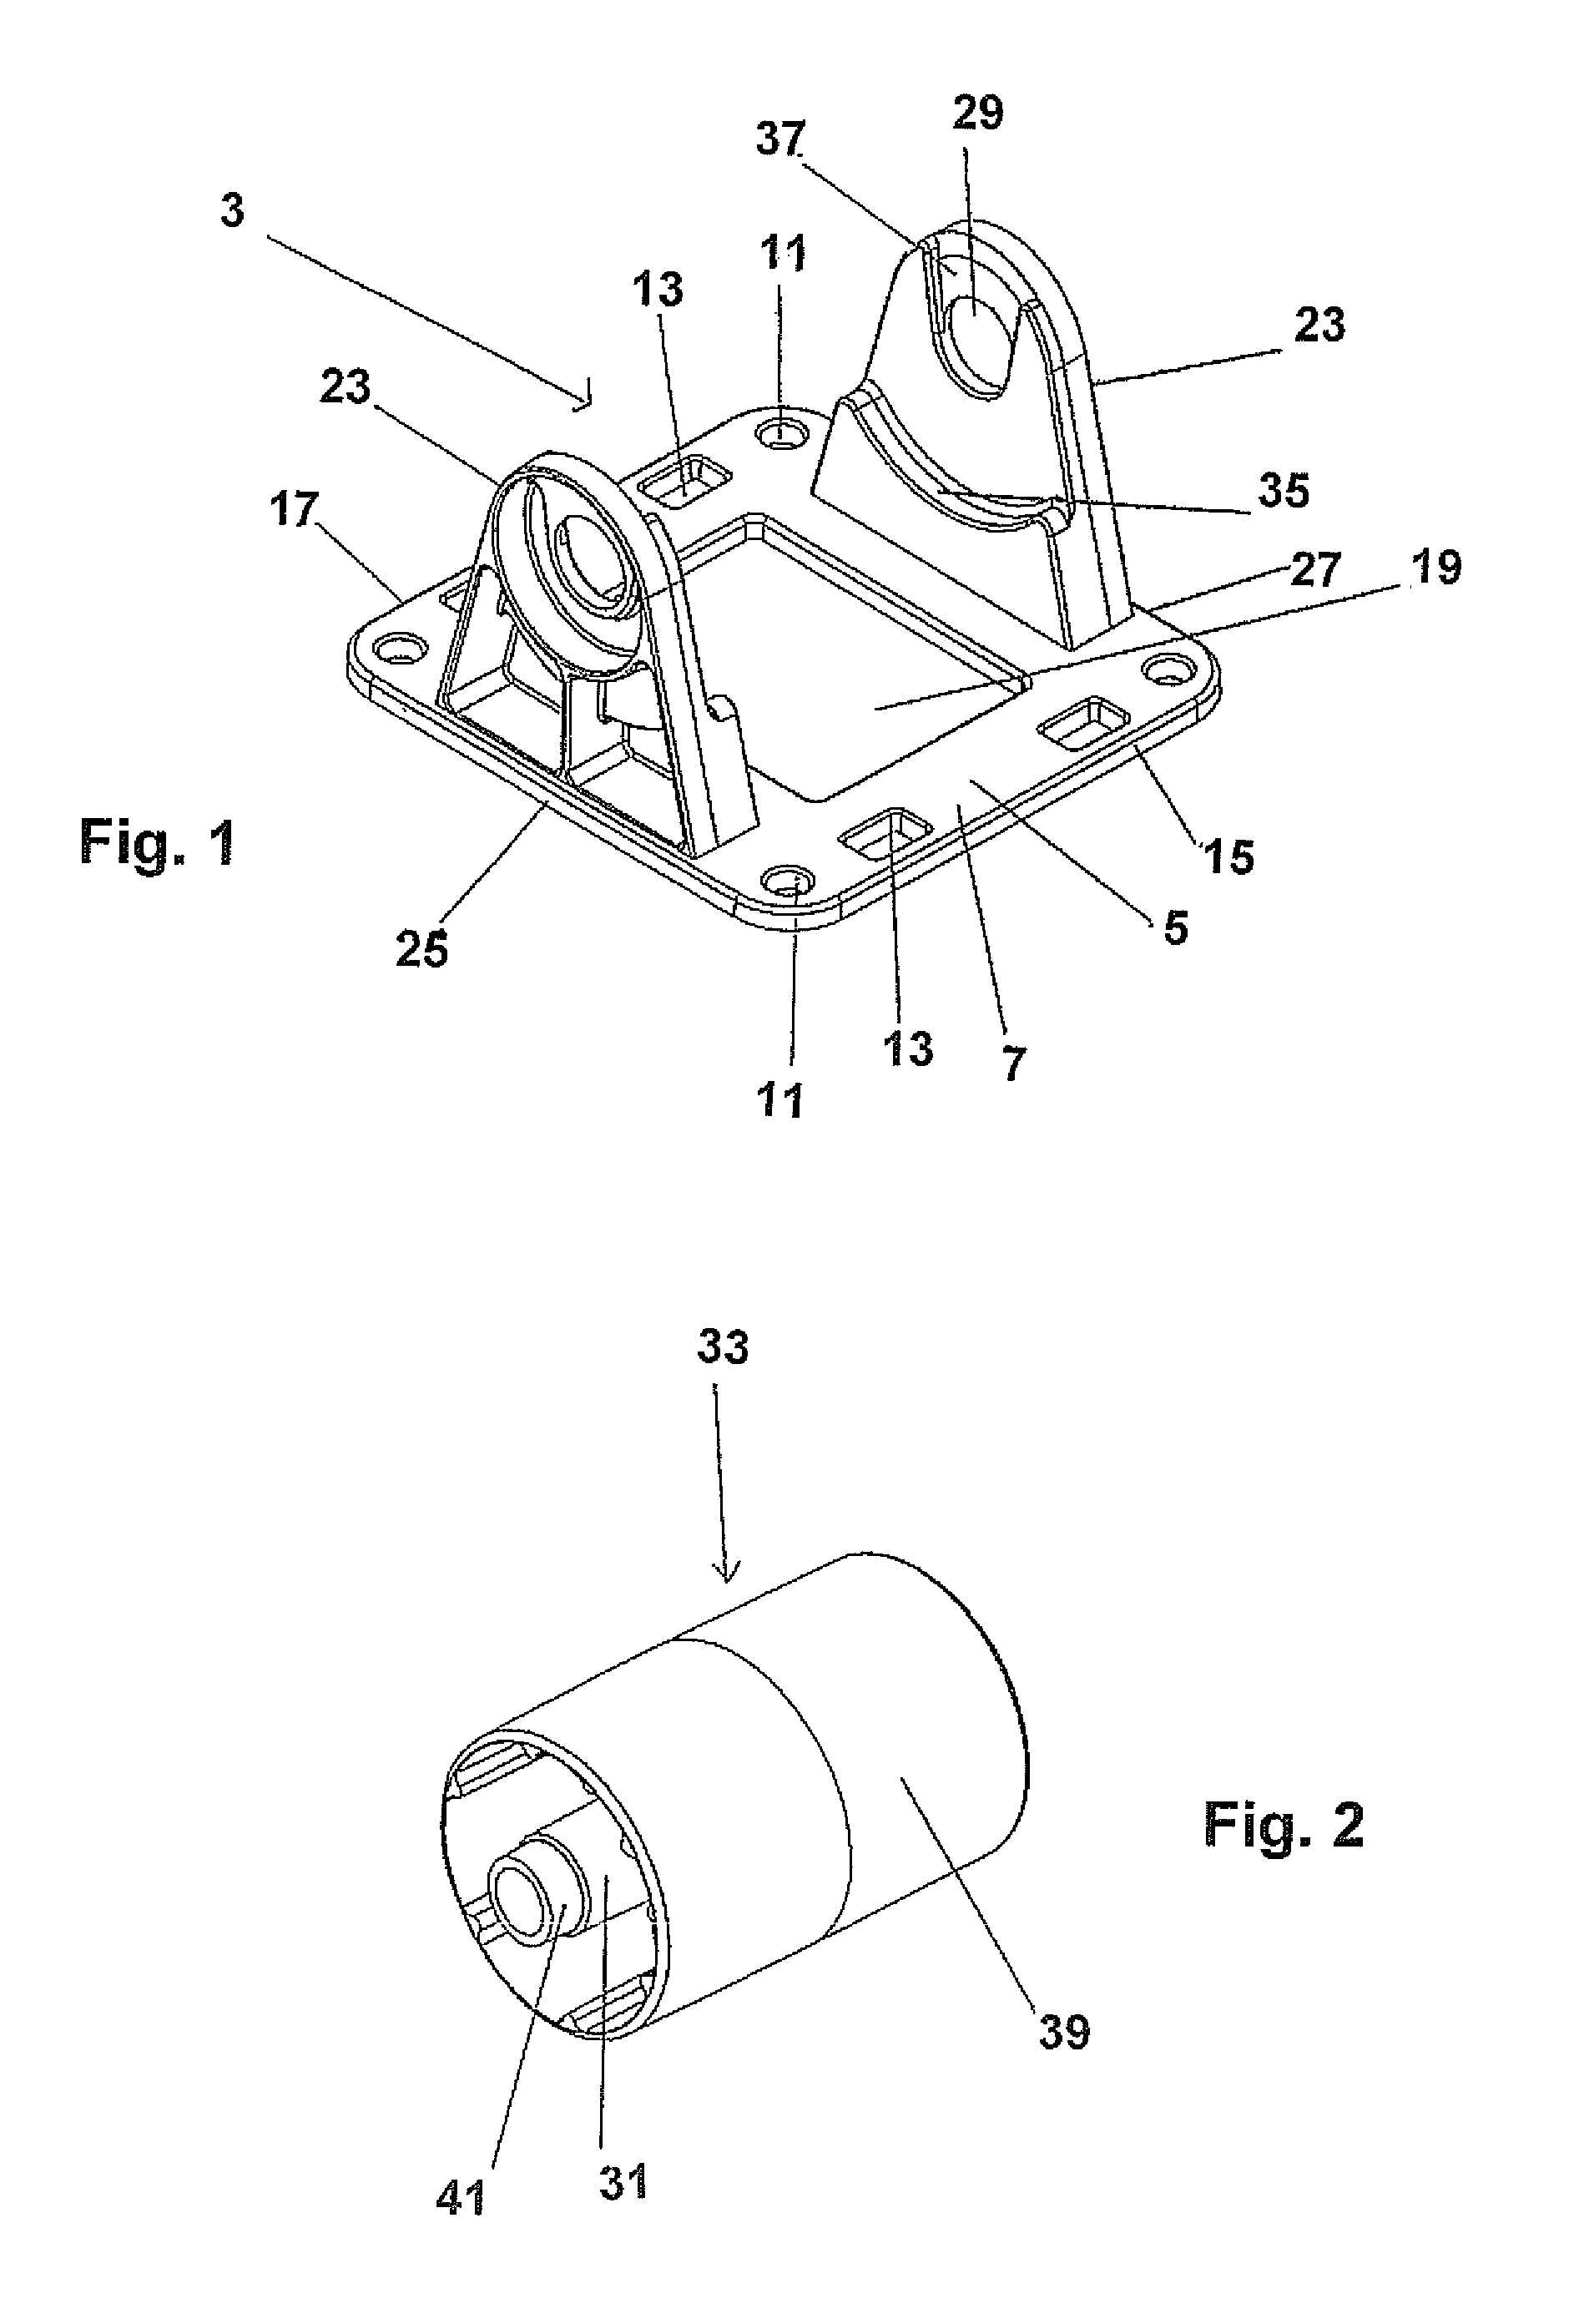 Wheeling device for a packaged article